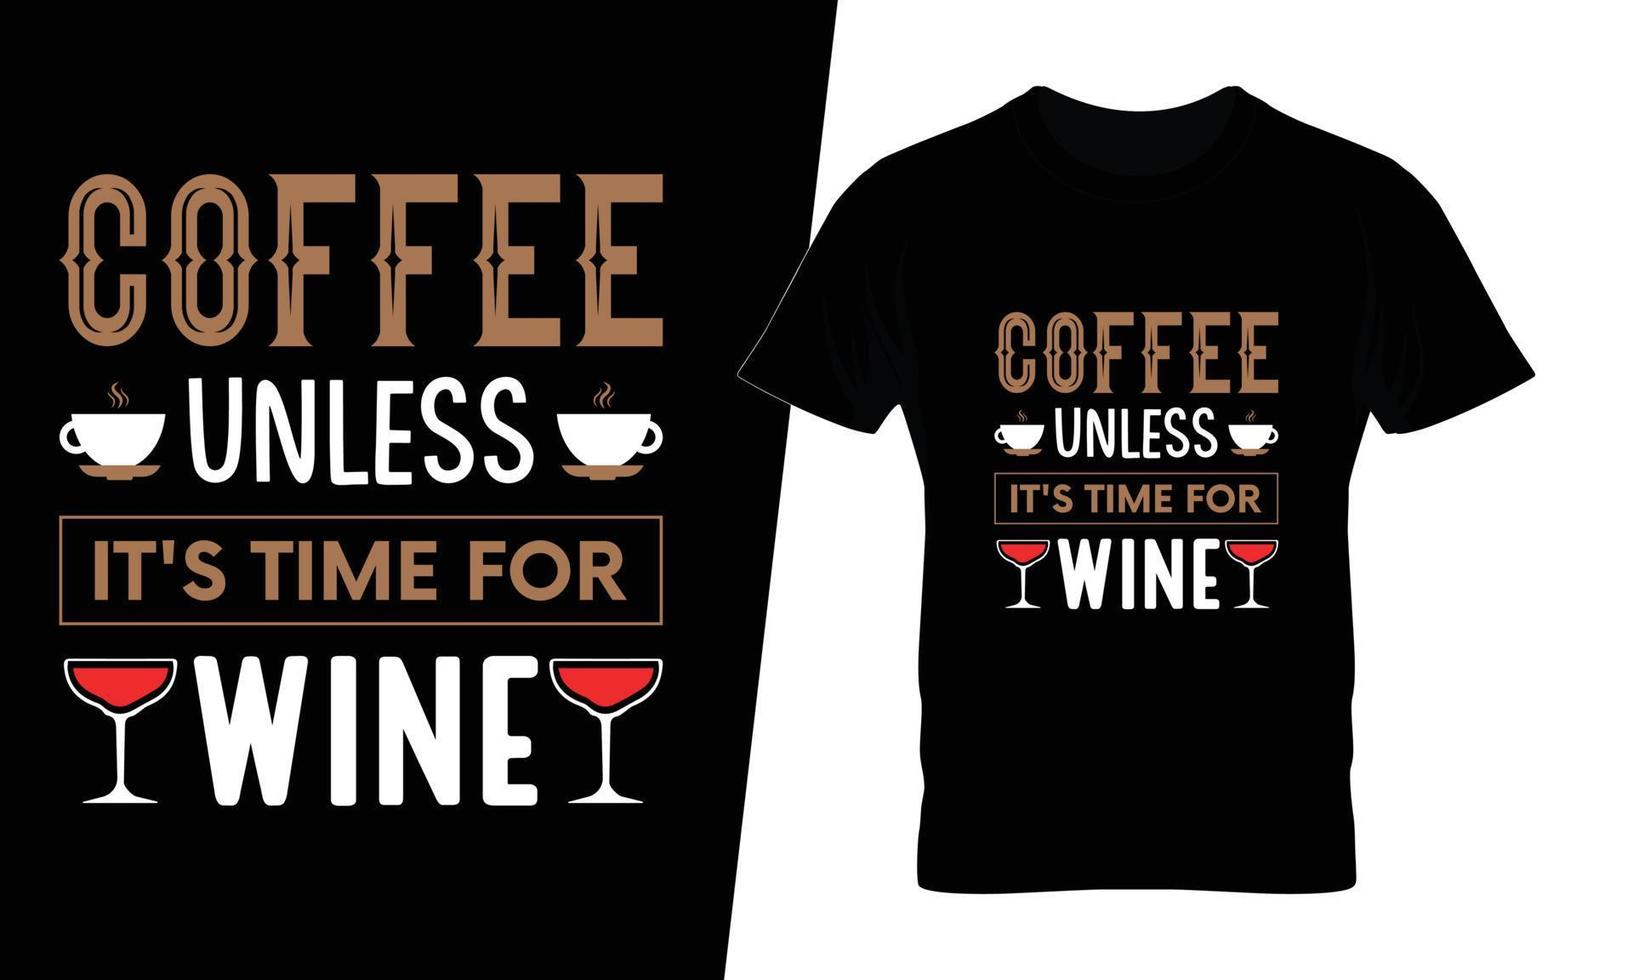 Coffee unless it is time for wine typography coffee t shirt design vector